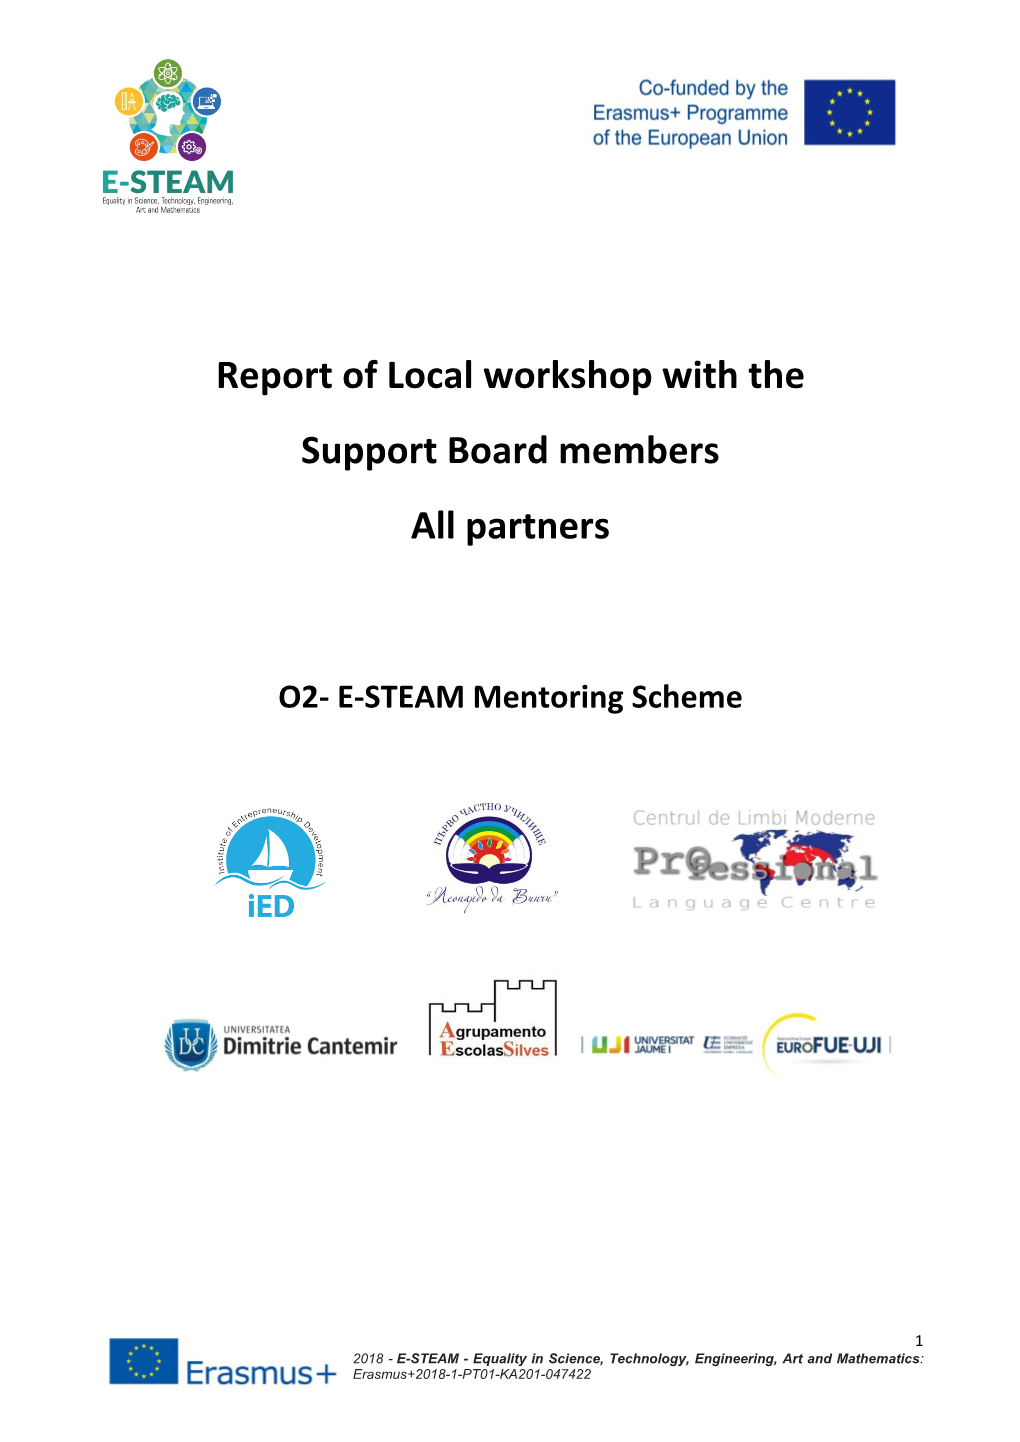 Report of Local Workshop with the Support Board Members All Partners